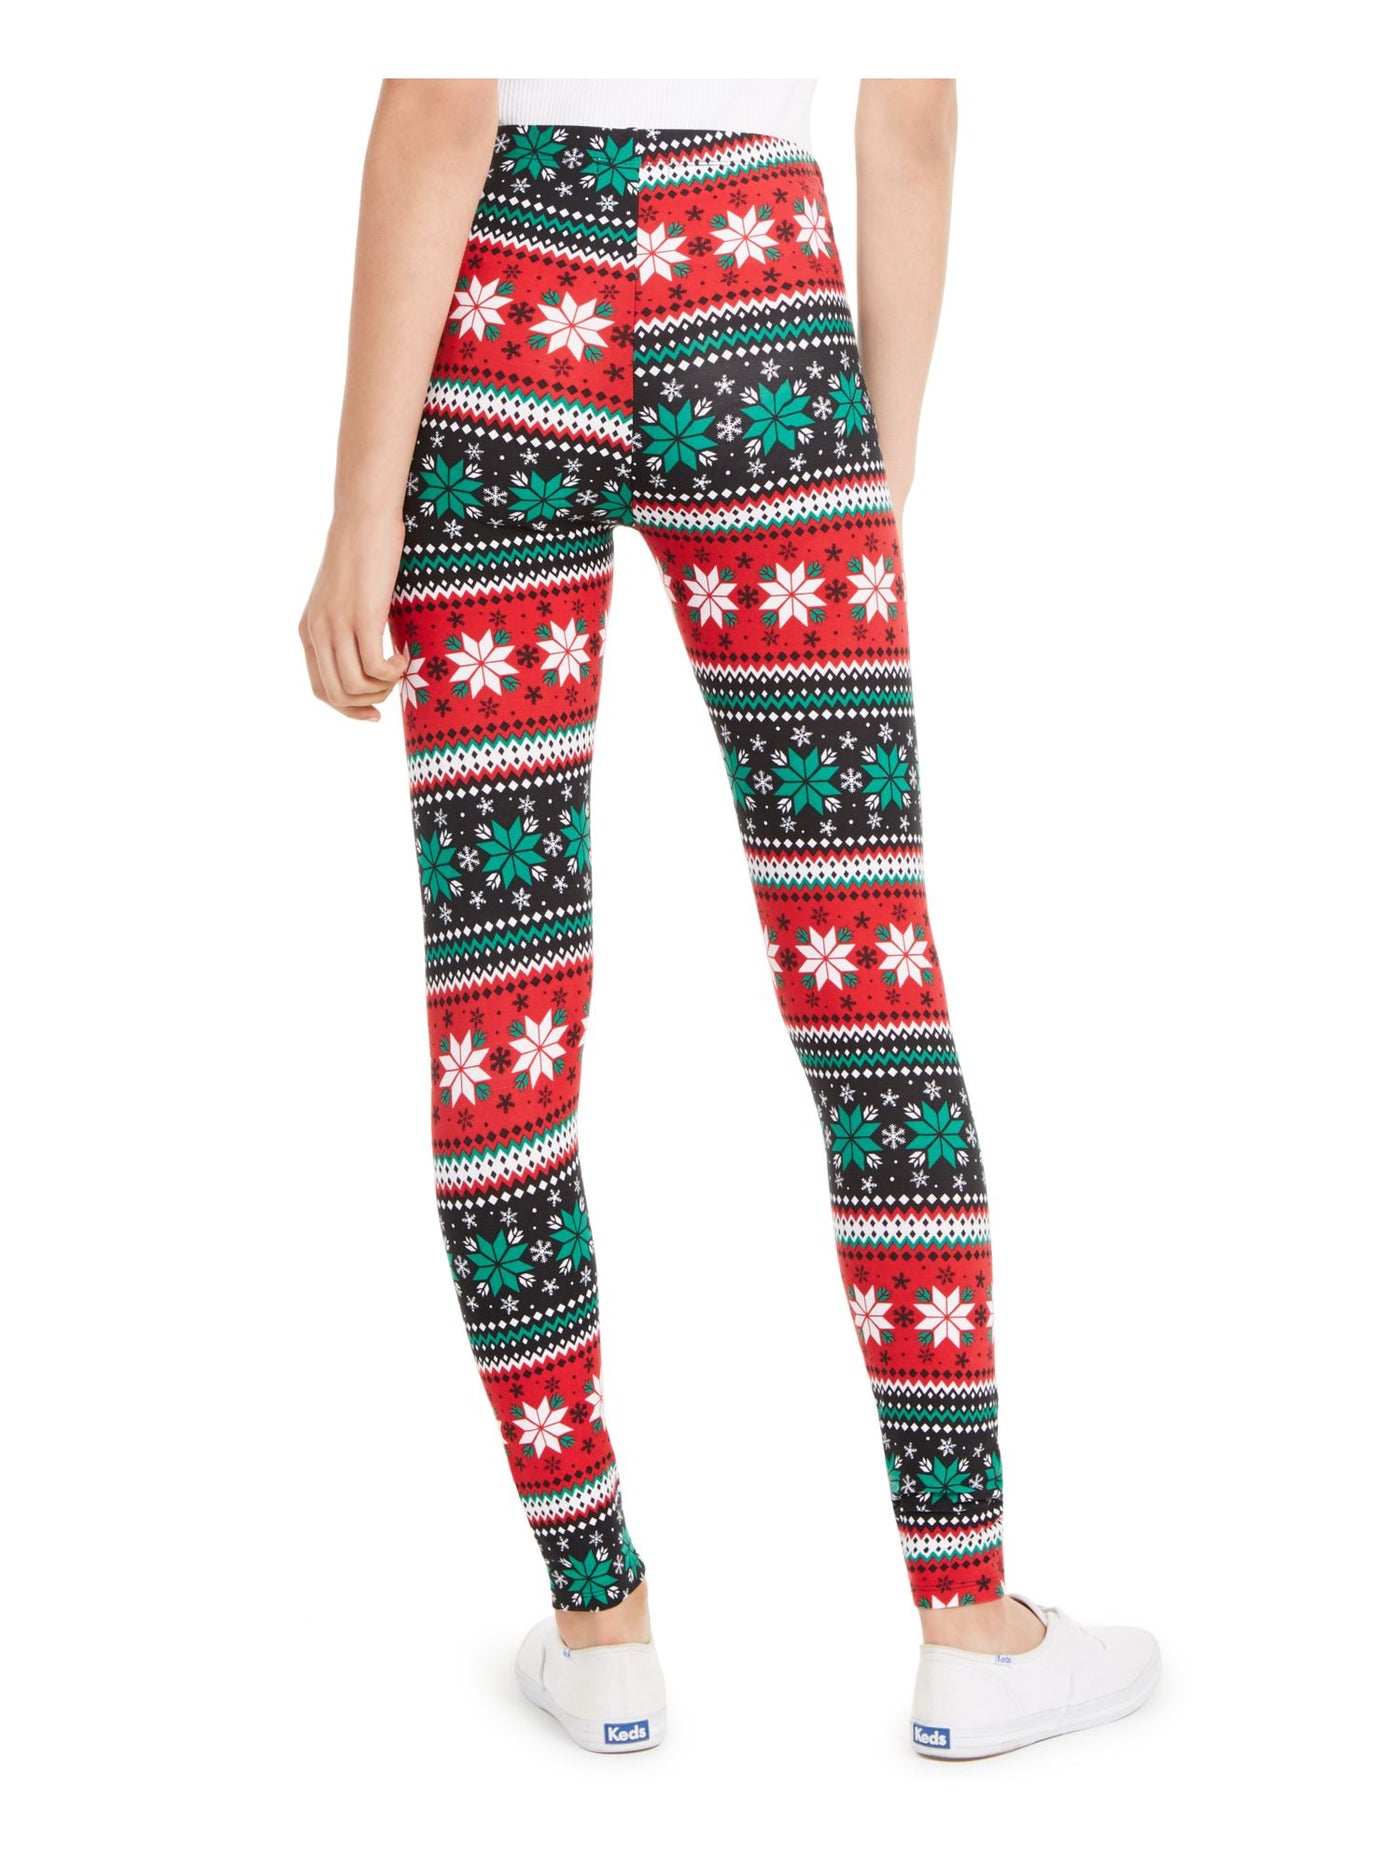 PLANET GOLD Womens Red Printed Holiday Leggings Juniors Size: S